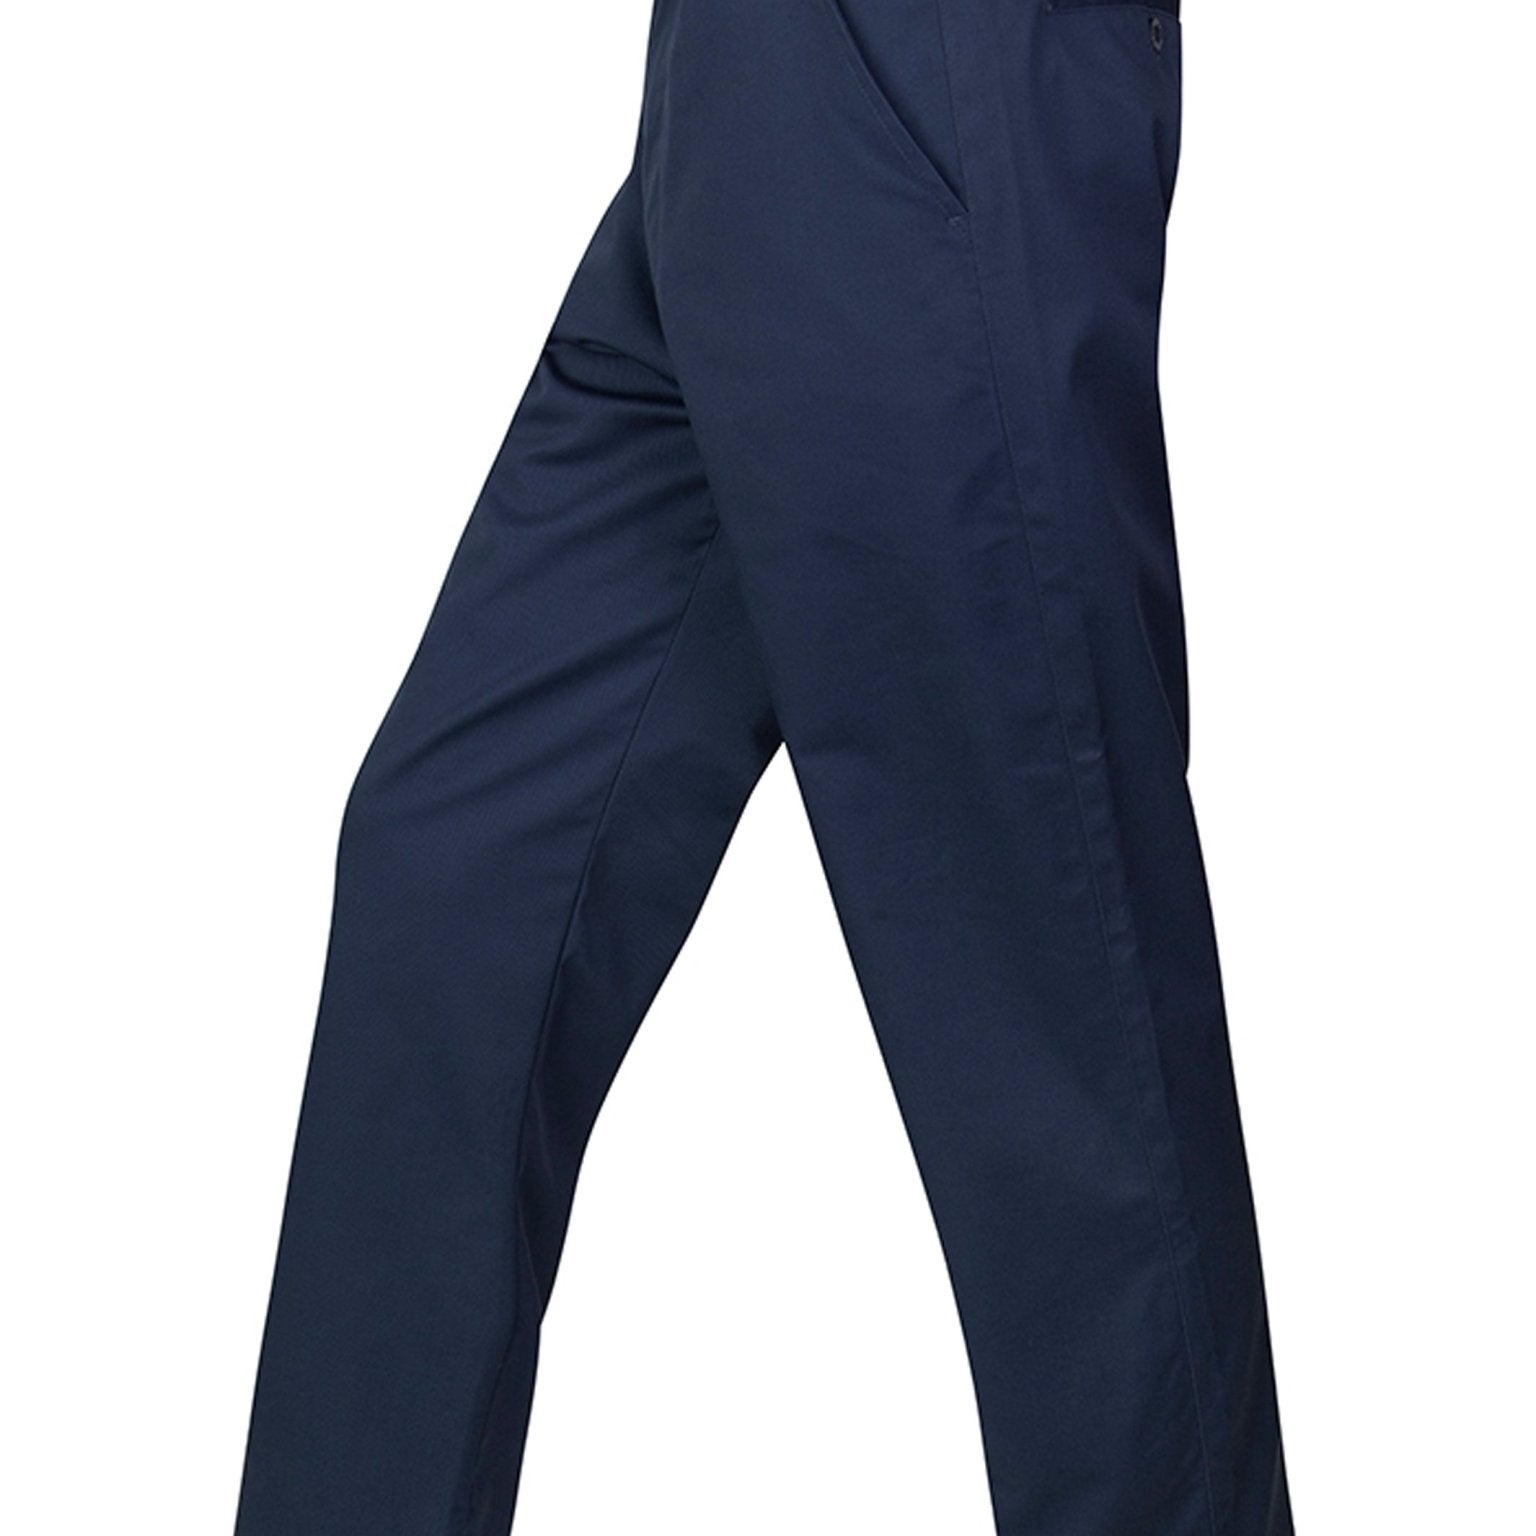 4elementsclothingHoggs of FifeHoggs of Fife - Mens Trousers - mens work trousers Stretch Durable Bushwhacker UnlinedTrousers & JeansBWSU/NY/S32